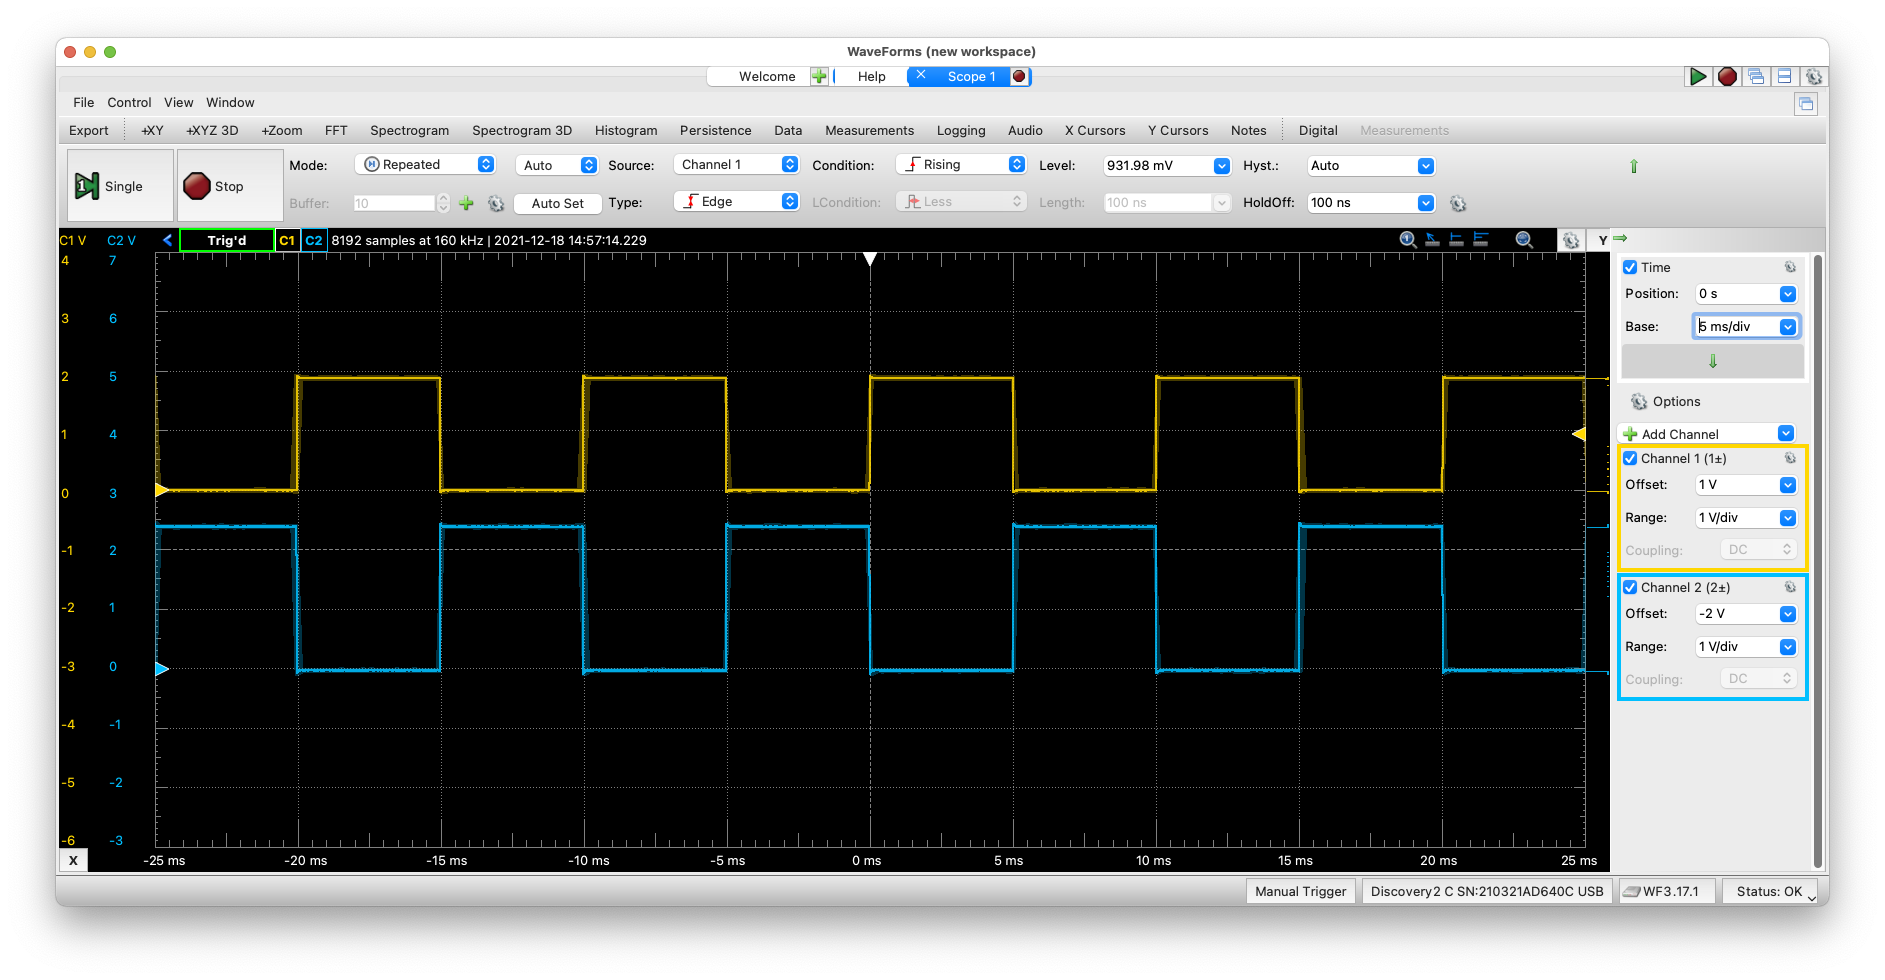 Oscilloscope view of 2 of 3 tasks, both have a delay of 5 ms